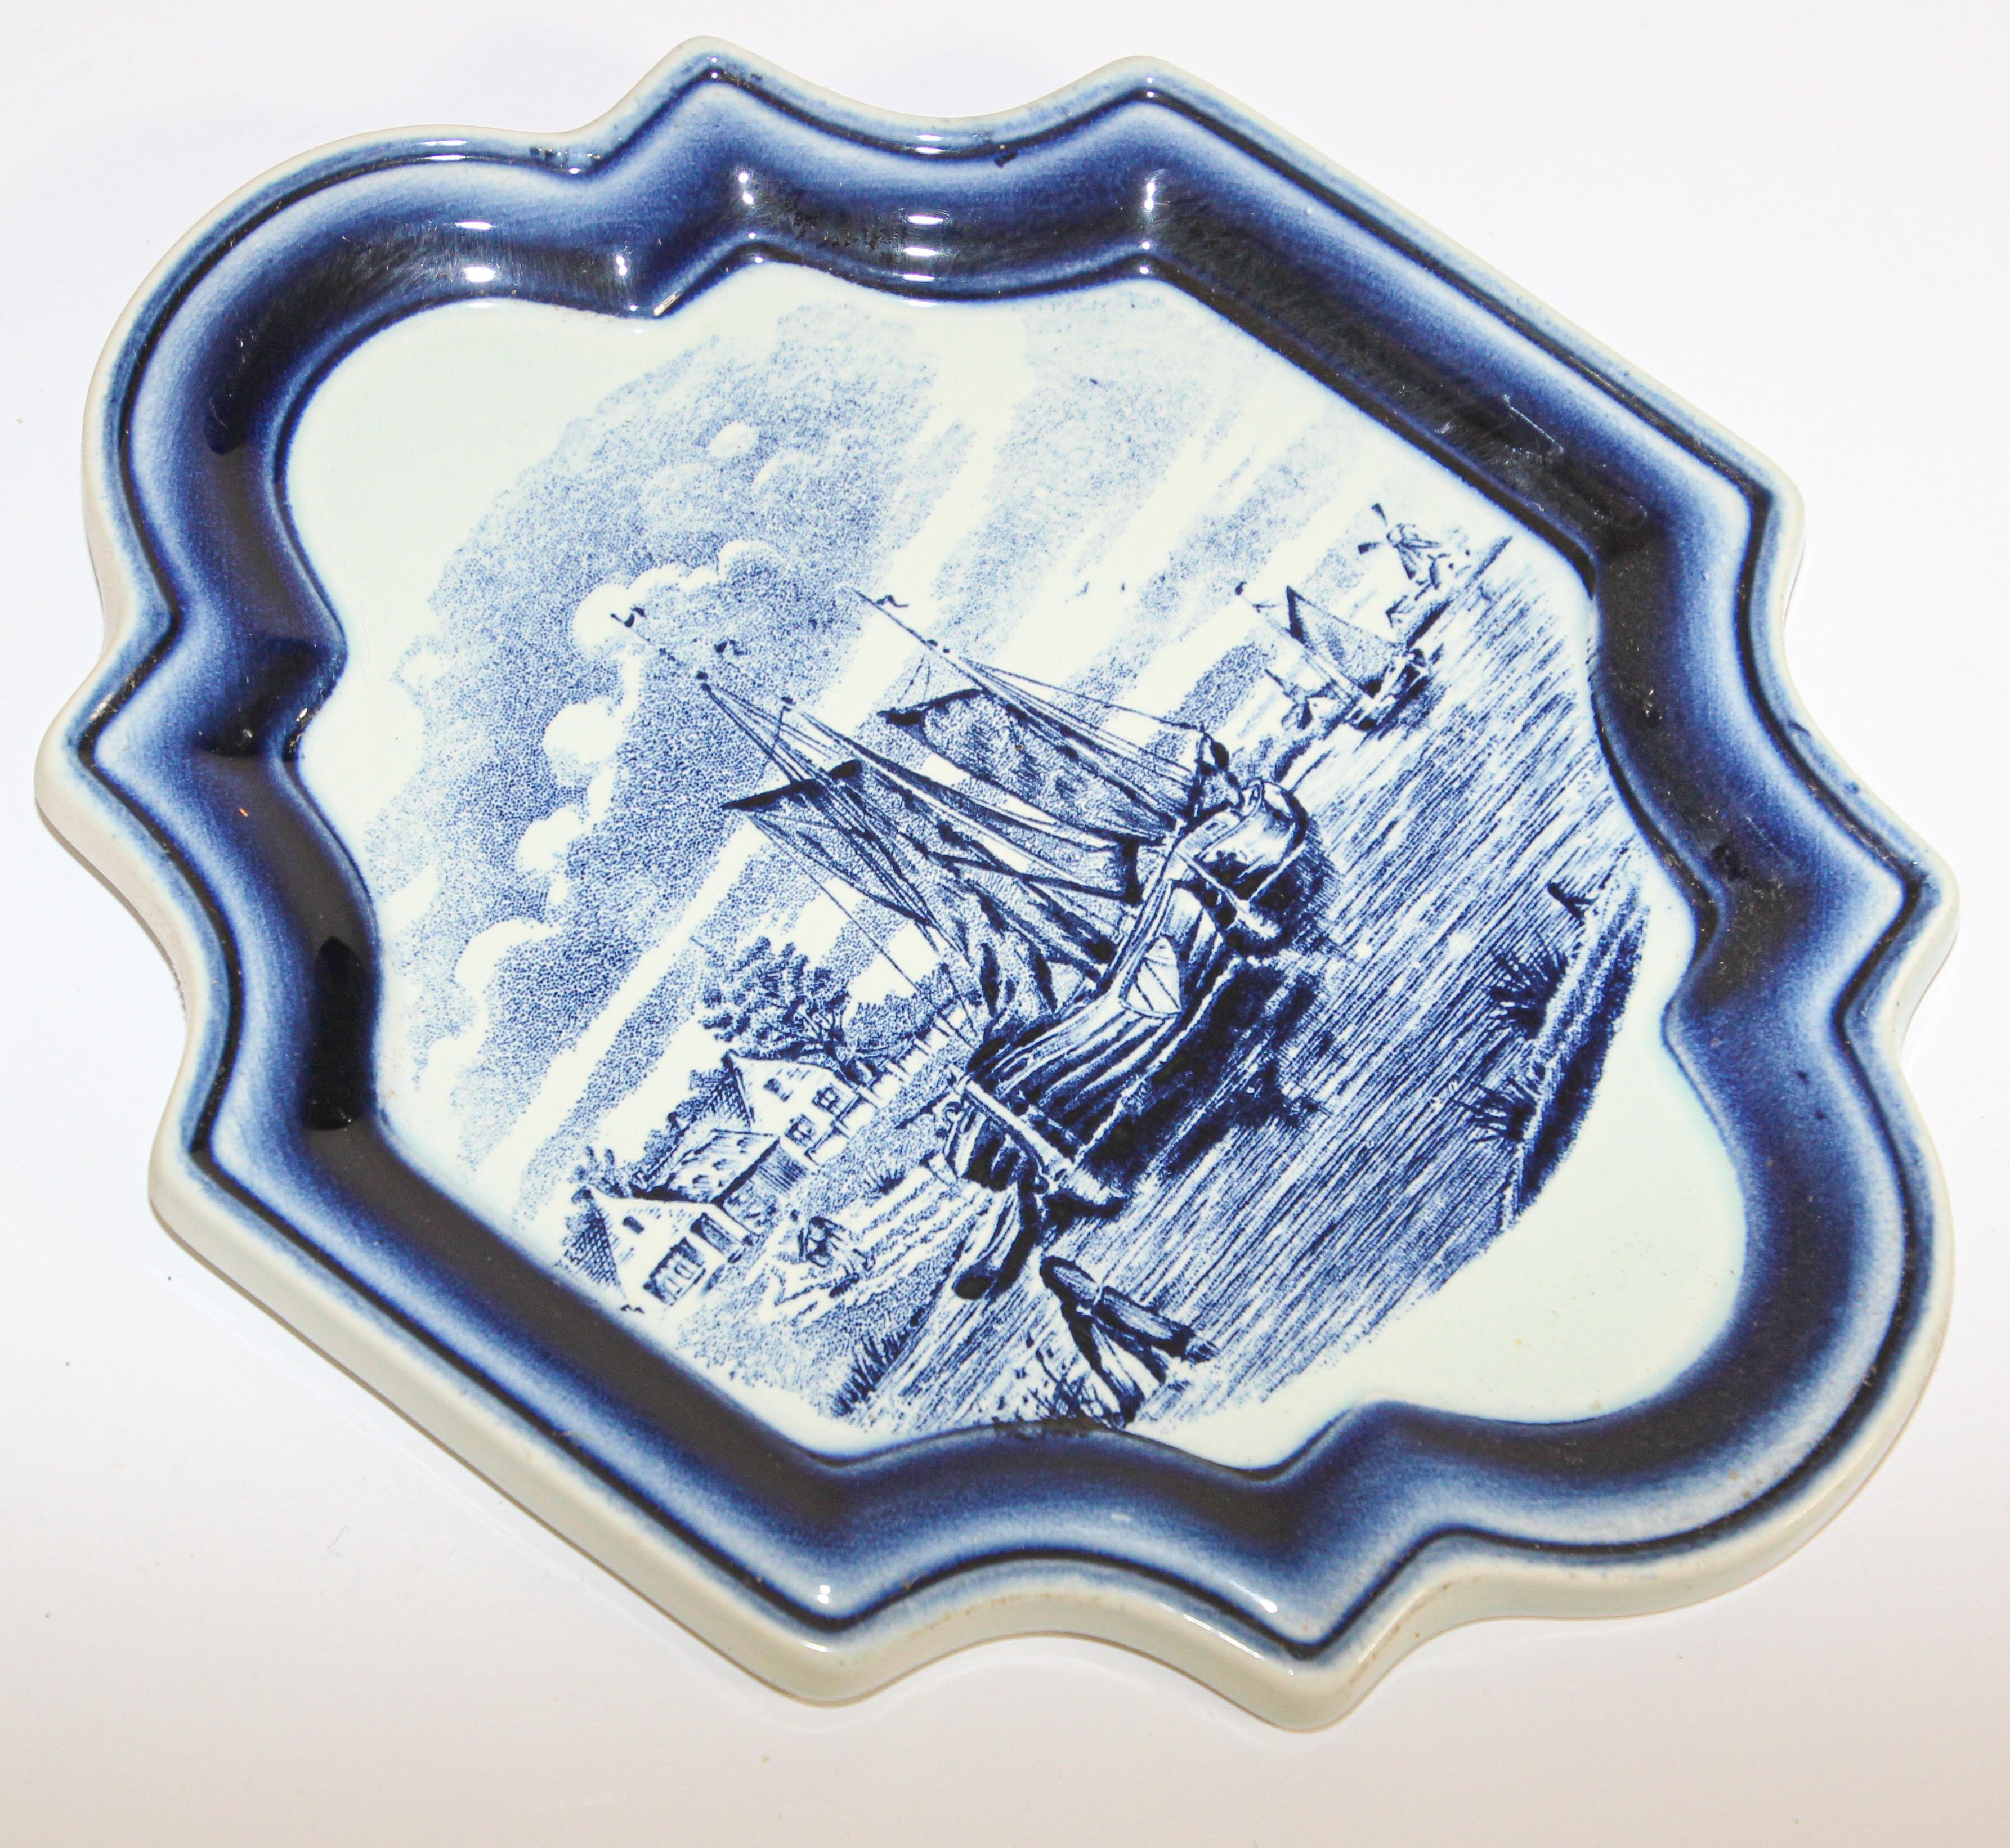 Boch Belgium Royal delft Hanging plaque.
Vintage Dutch delft blue and white ceramic wall decorative plaque with shaped edge cartouche-shaped with the border in moulded relief.
Decorated with a sailing ship plate.
Stunning Boch Delfts blue and